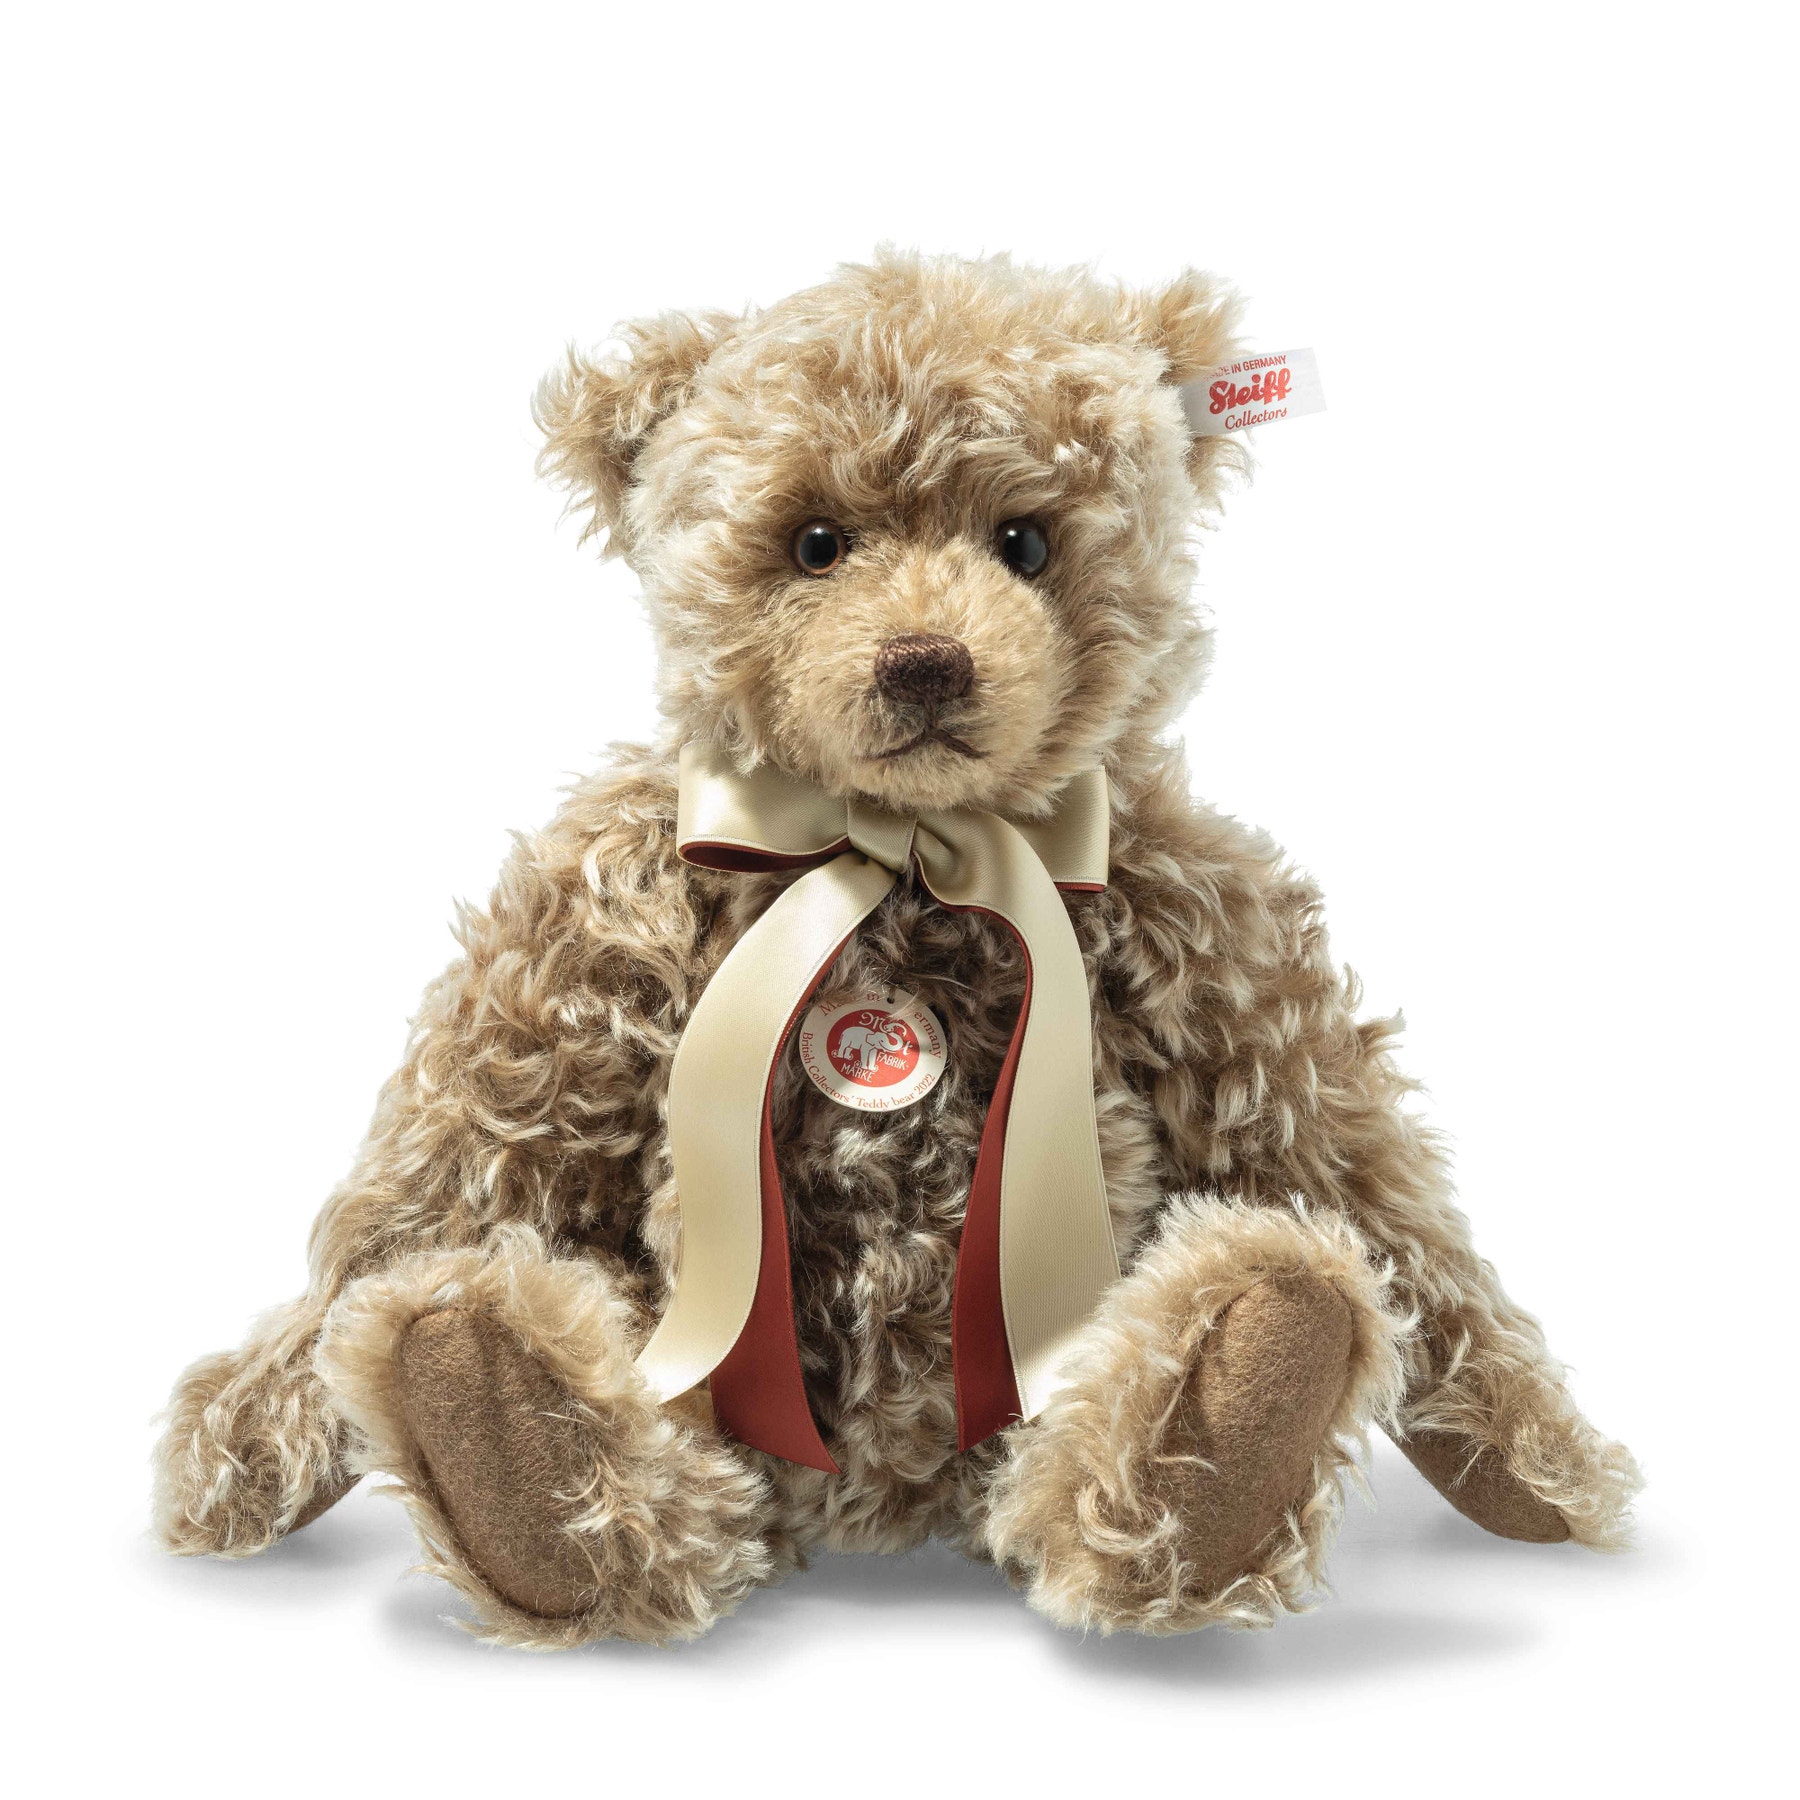 Ours Teddy British Collectors' 2022